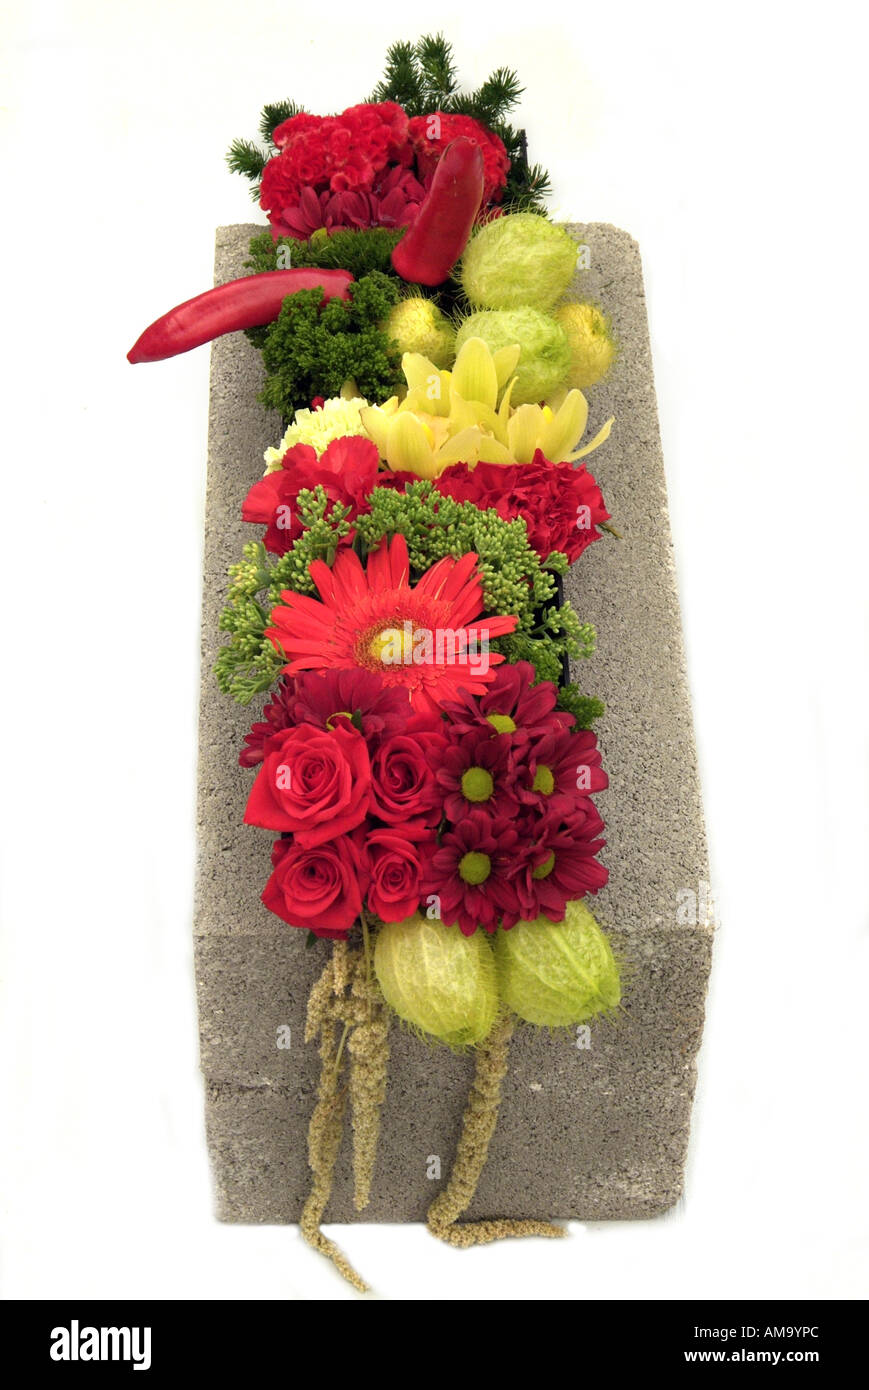 Close up of flower arrangement bloom stone slab building material contrast white background cut out cutout art craft Stock Photo